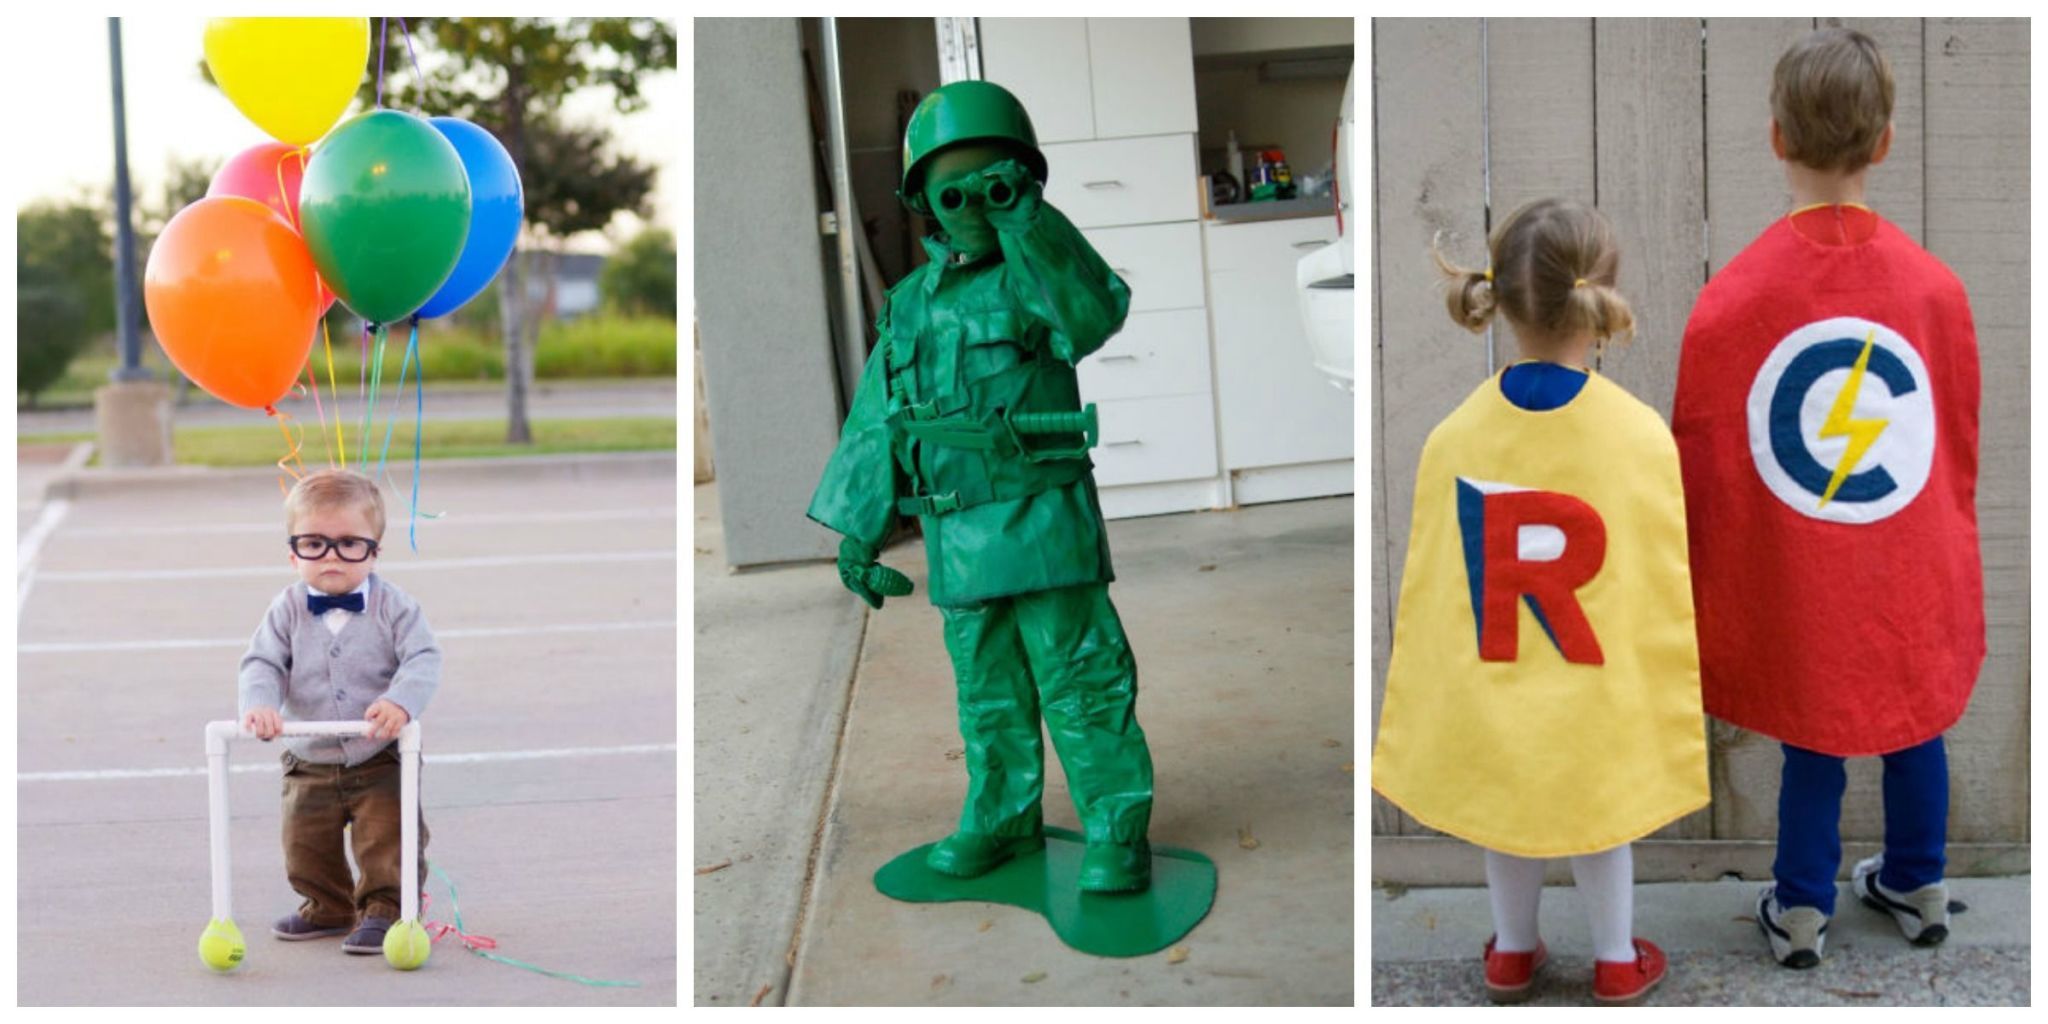 Easy costumes ideas to make at home.